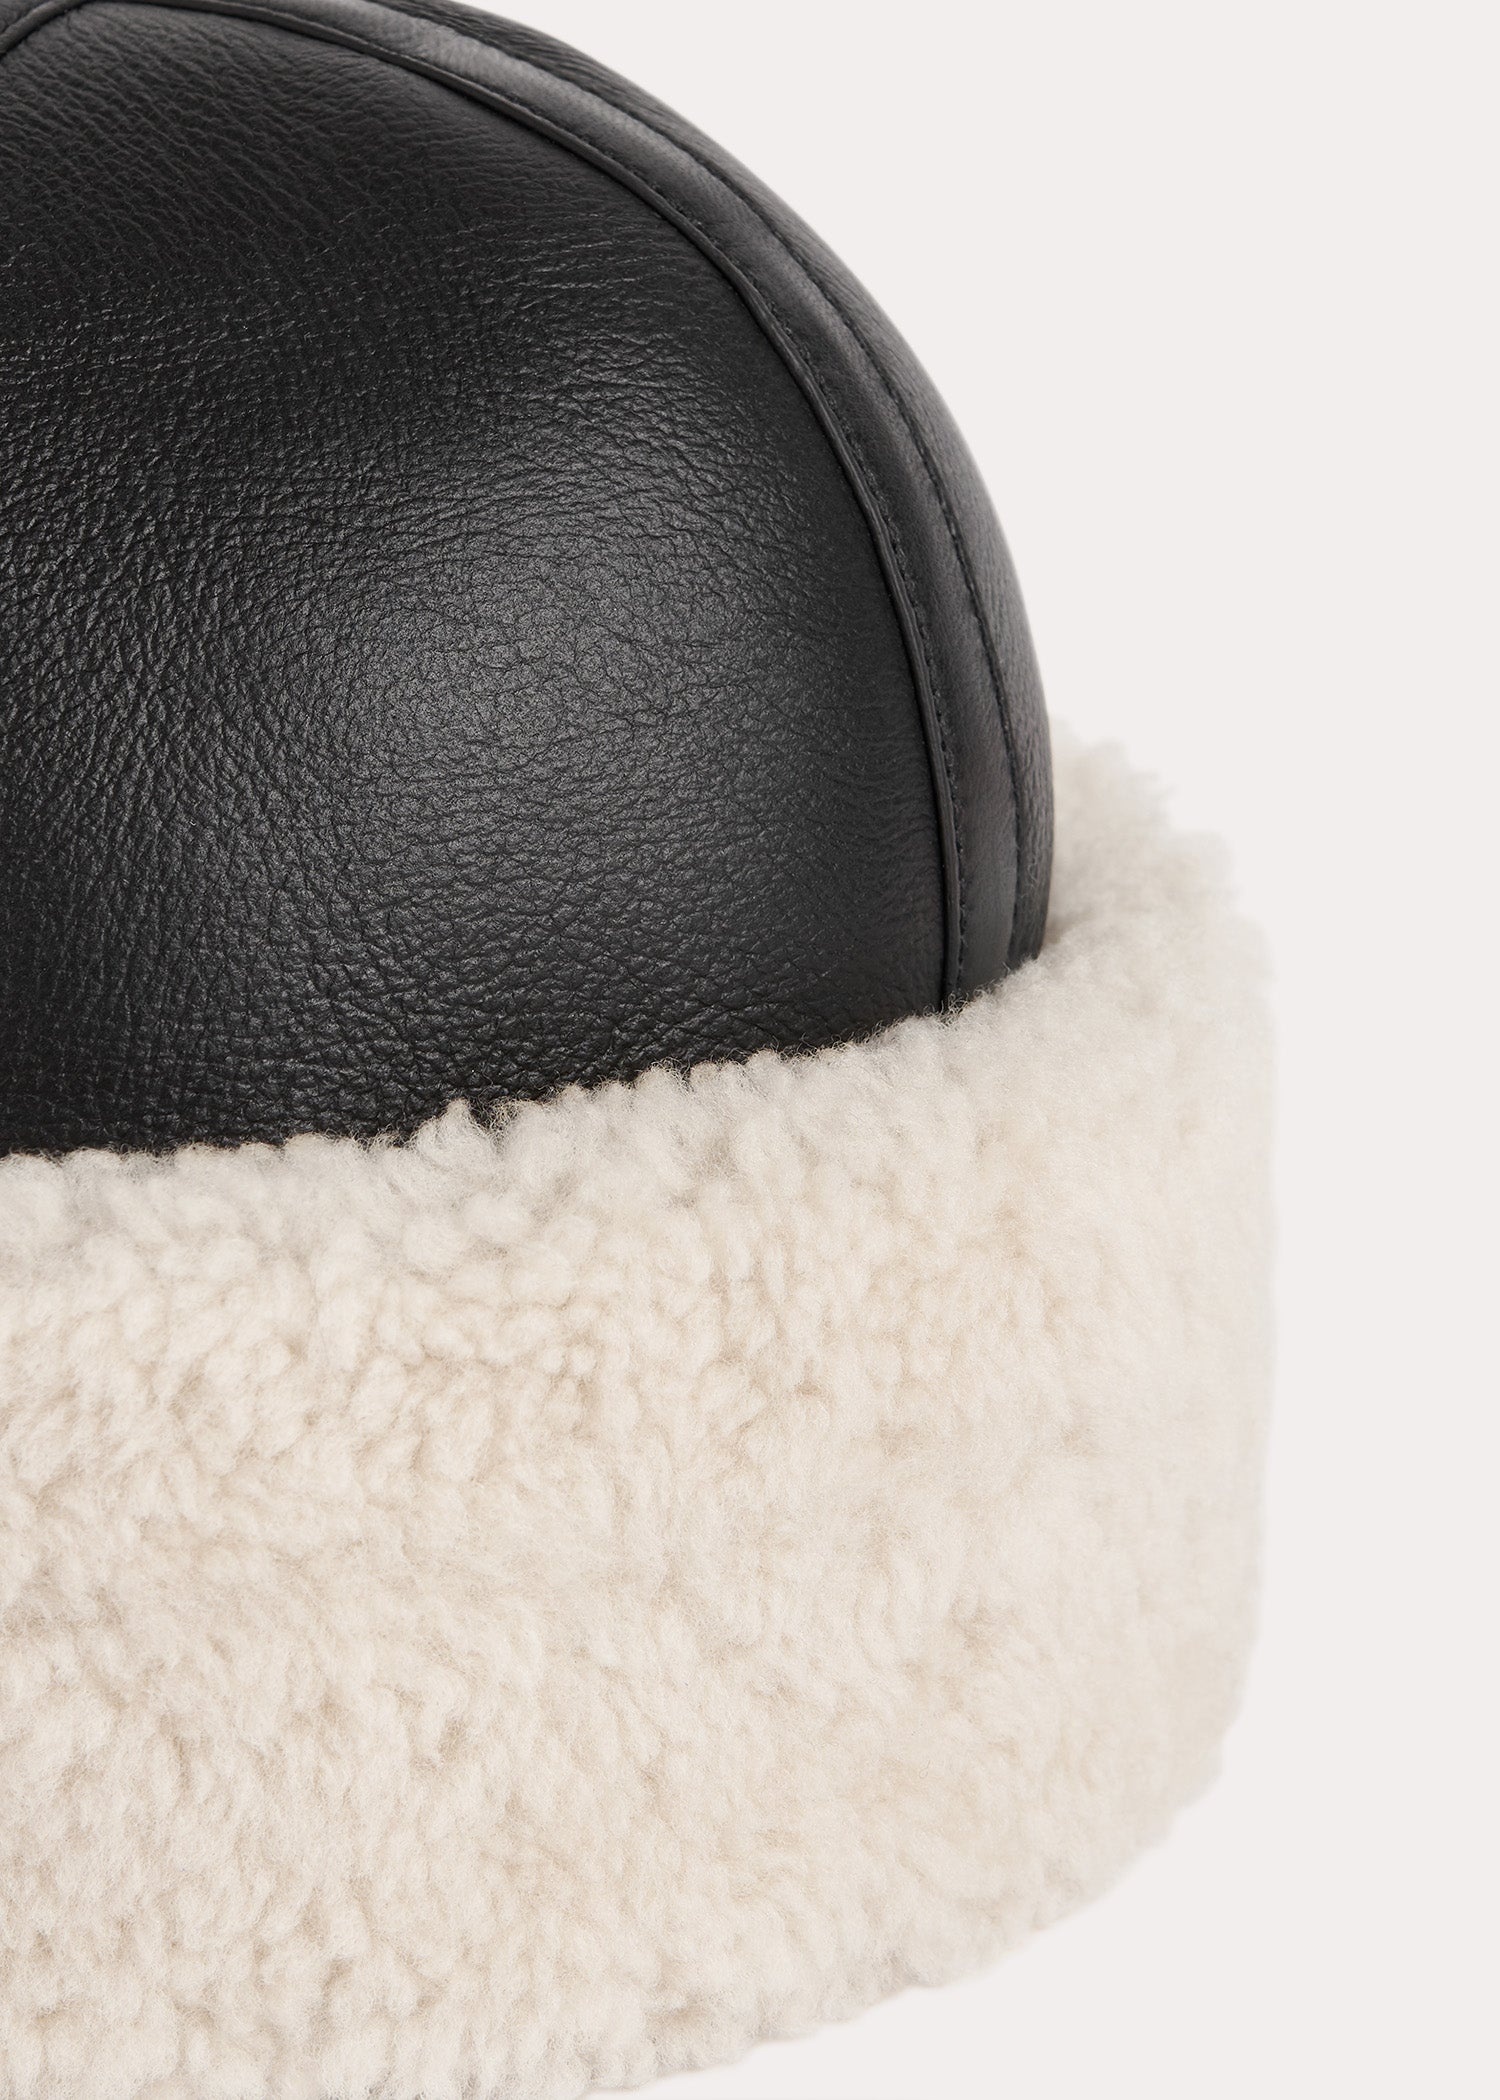 Shearling winter hat black/off white - 3